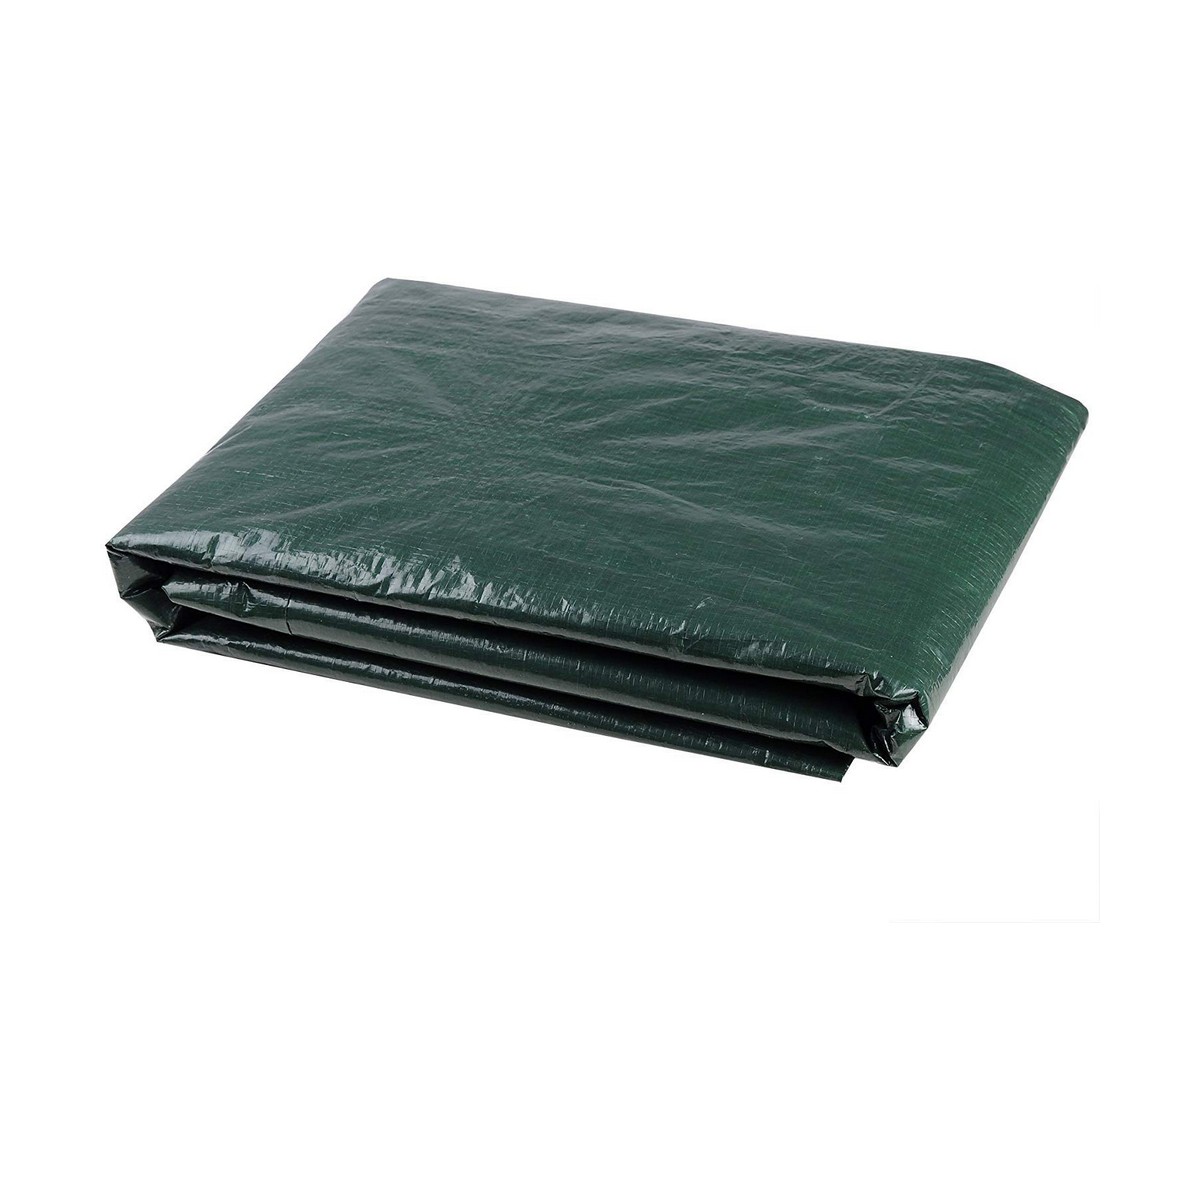 Protective Cover for Barbecue Altadex Polyethylene Green